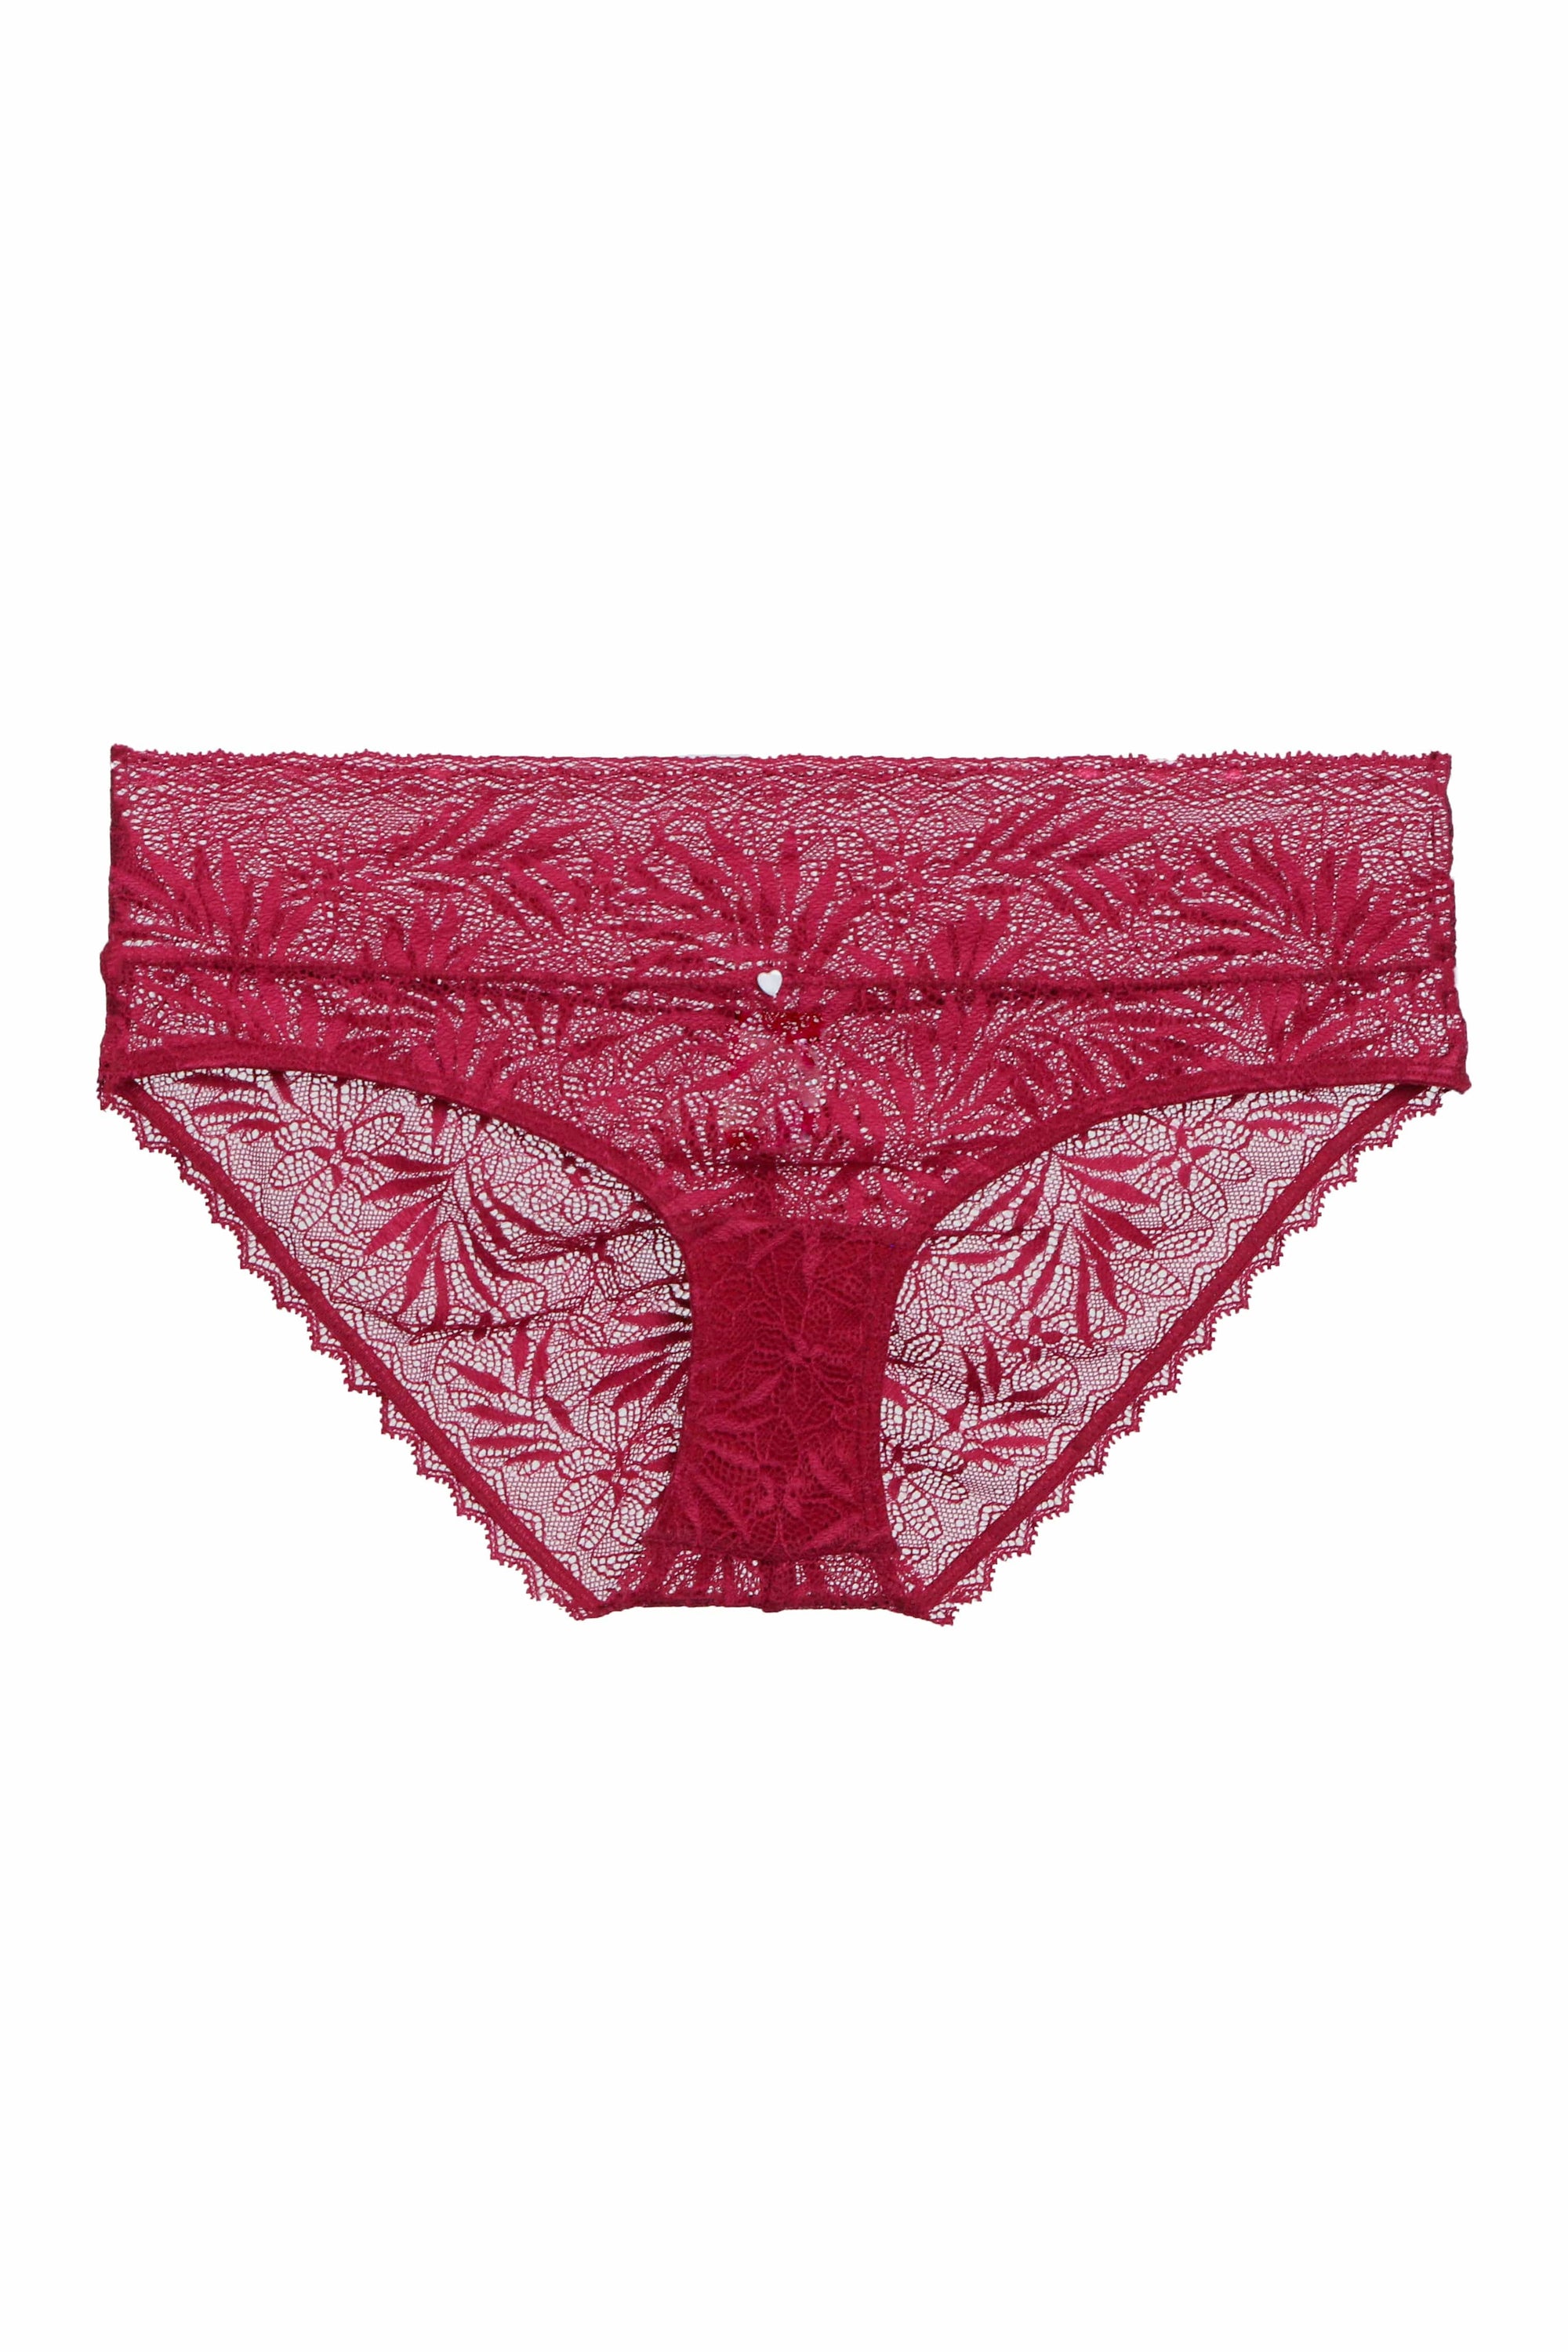 Leonisa Semi low-rise smooth hiphugger panty - Red S